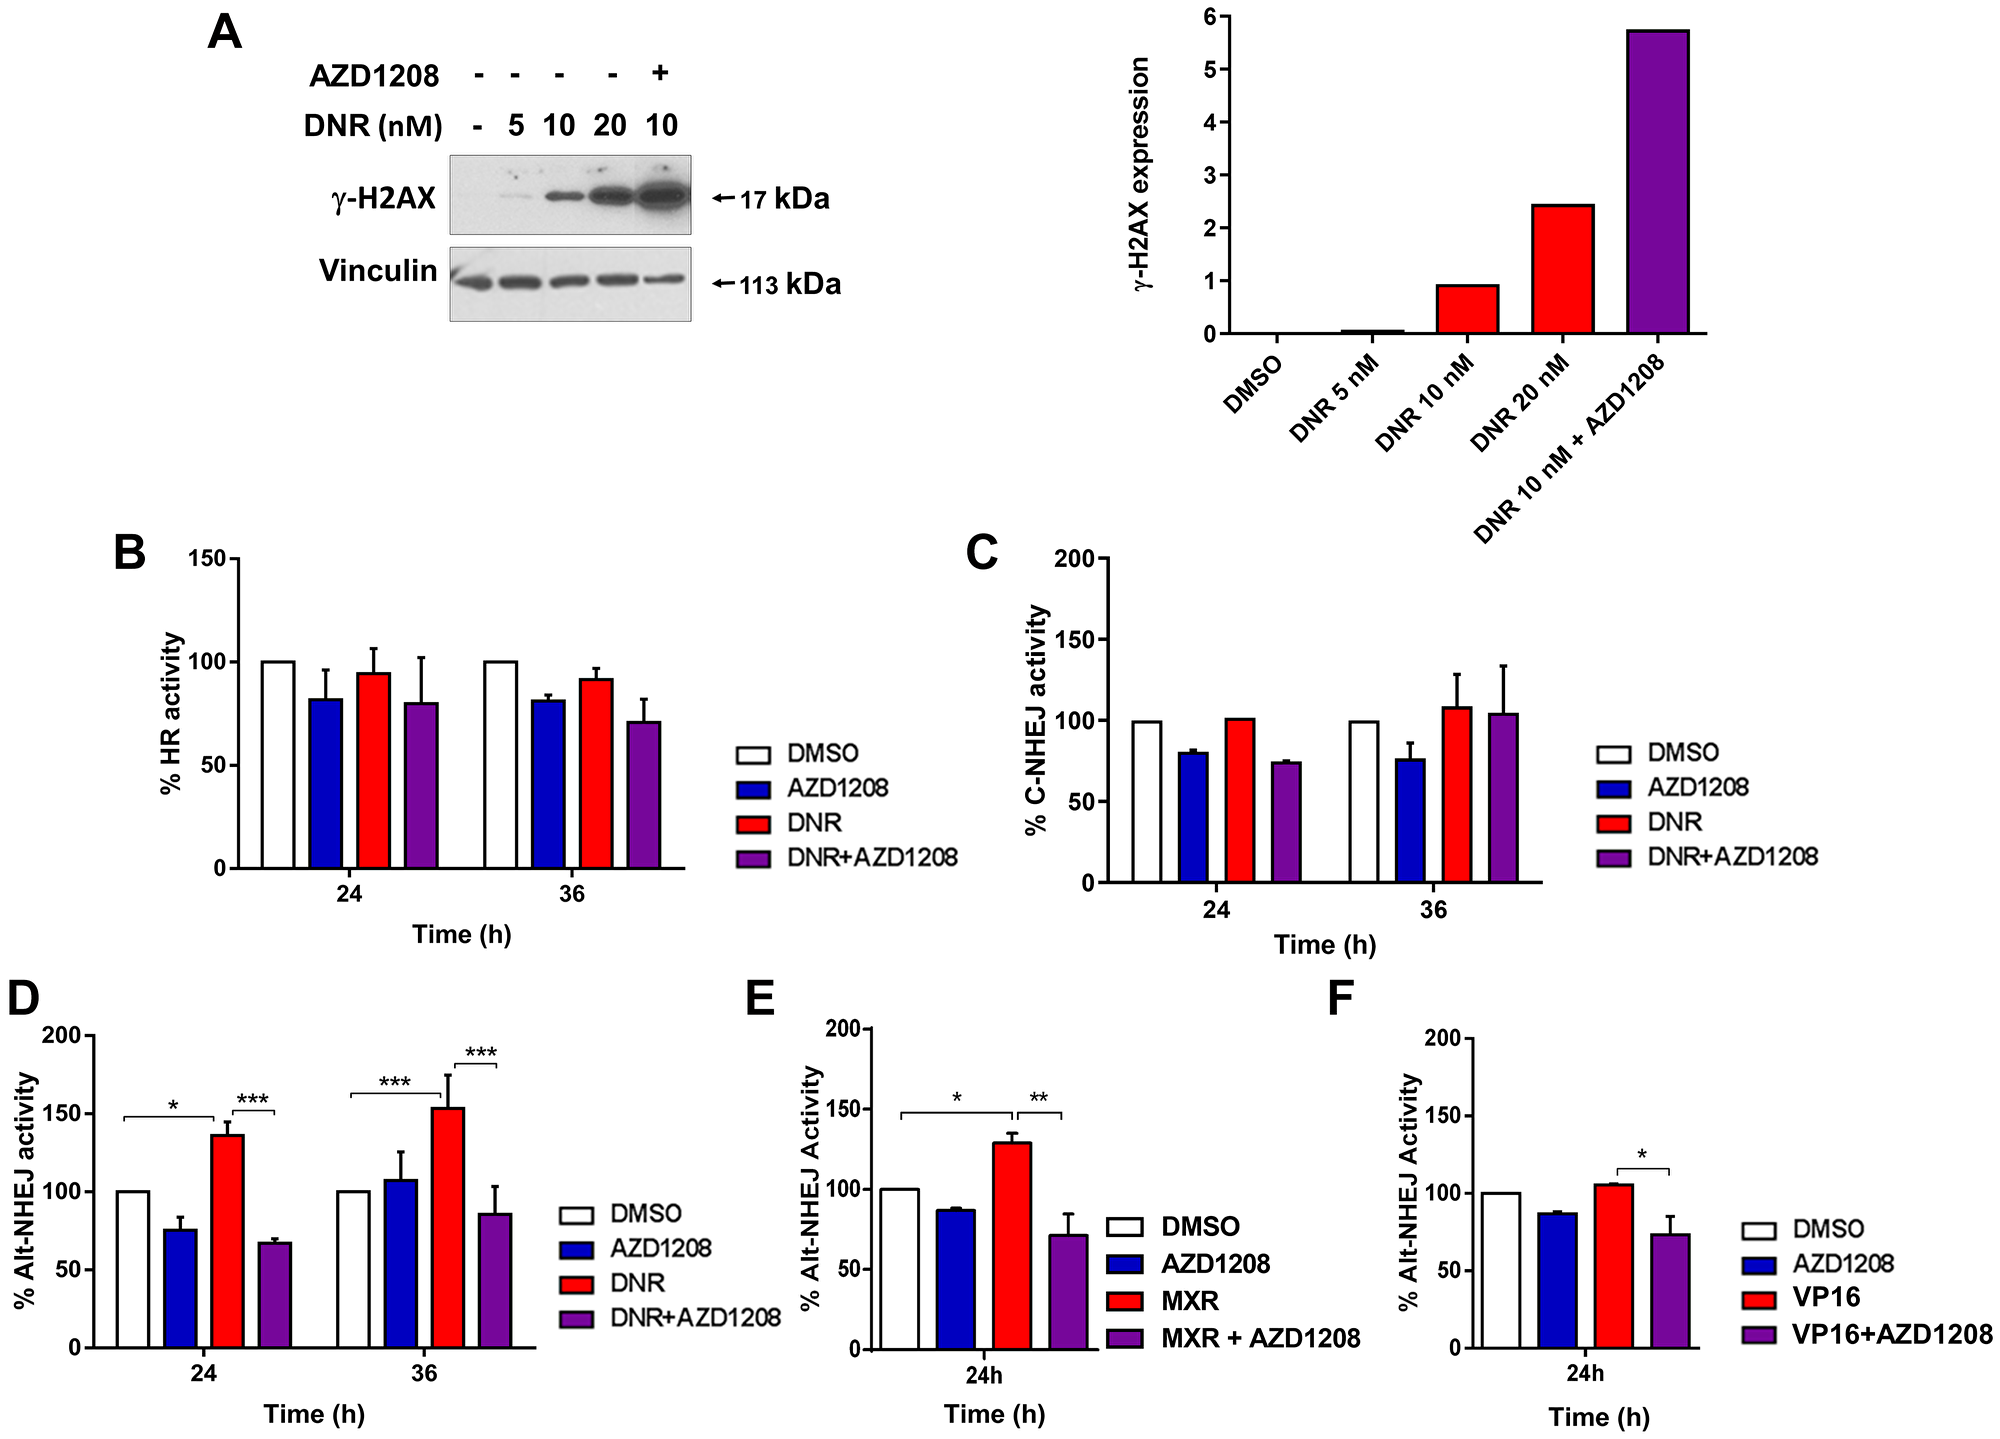 Topoisomerase 2 inhibitor treatment upregulates Alt-NHEJ, but not HR or C-NHEJ, DNA DSB repair activity in cells with FLT3-ITD, and Pim inhibitor co-treatment abrogates Alt-NHEJ upregulation.